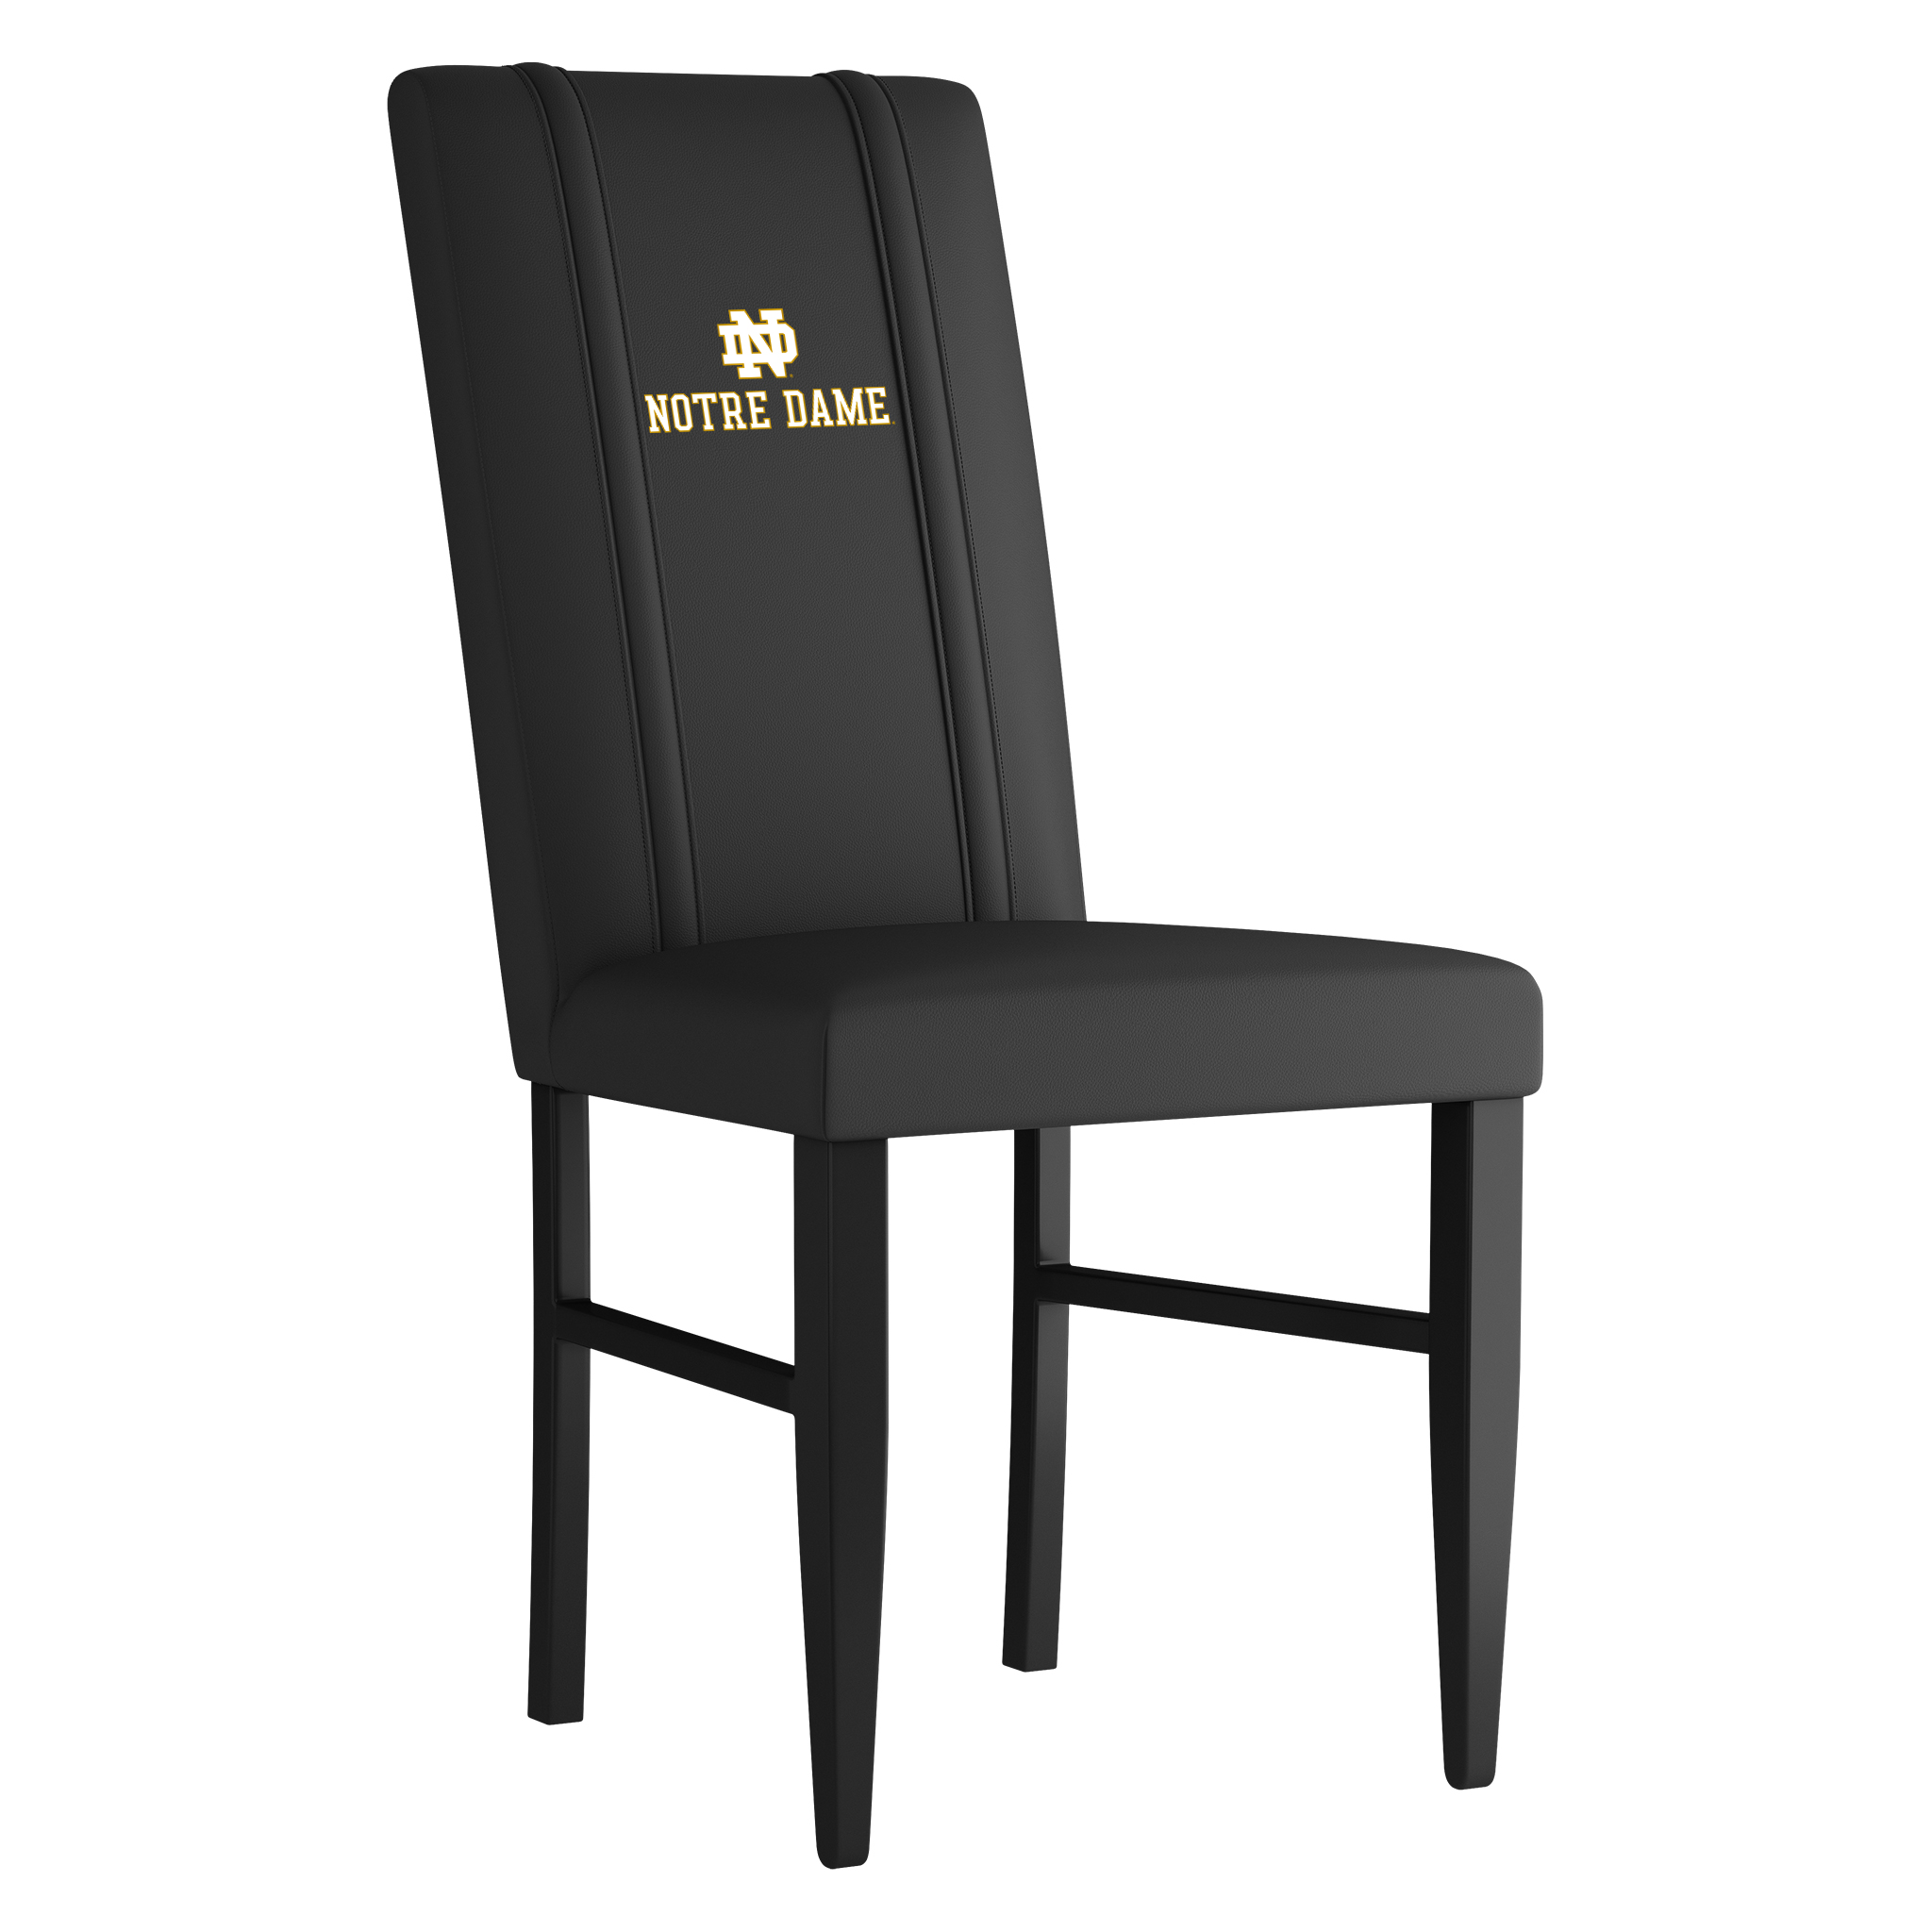 Notre Dame Side Chair 2000 With Notre Dame Alternate Logo